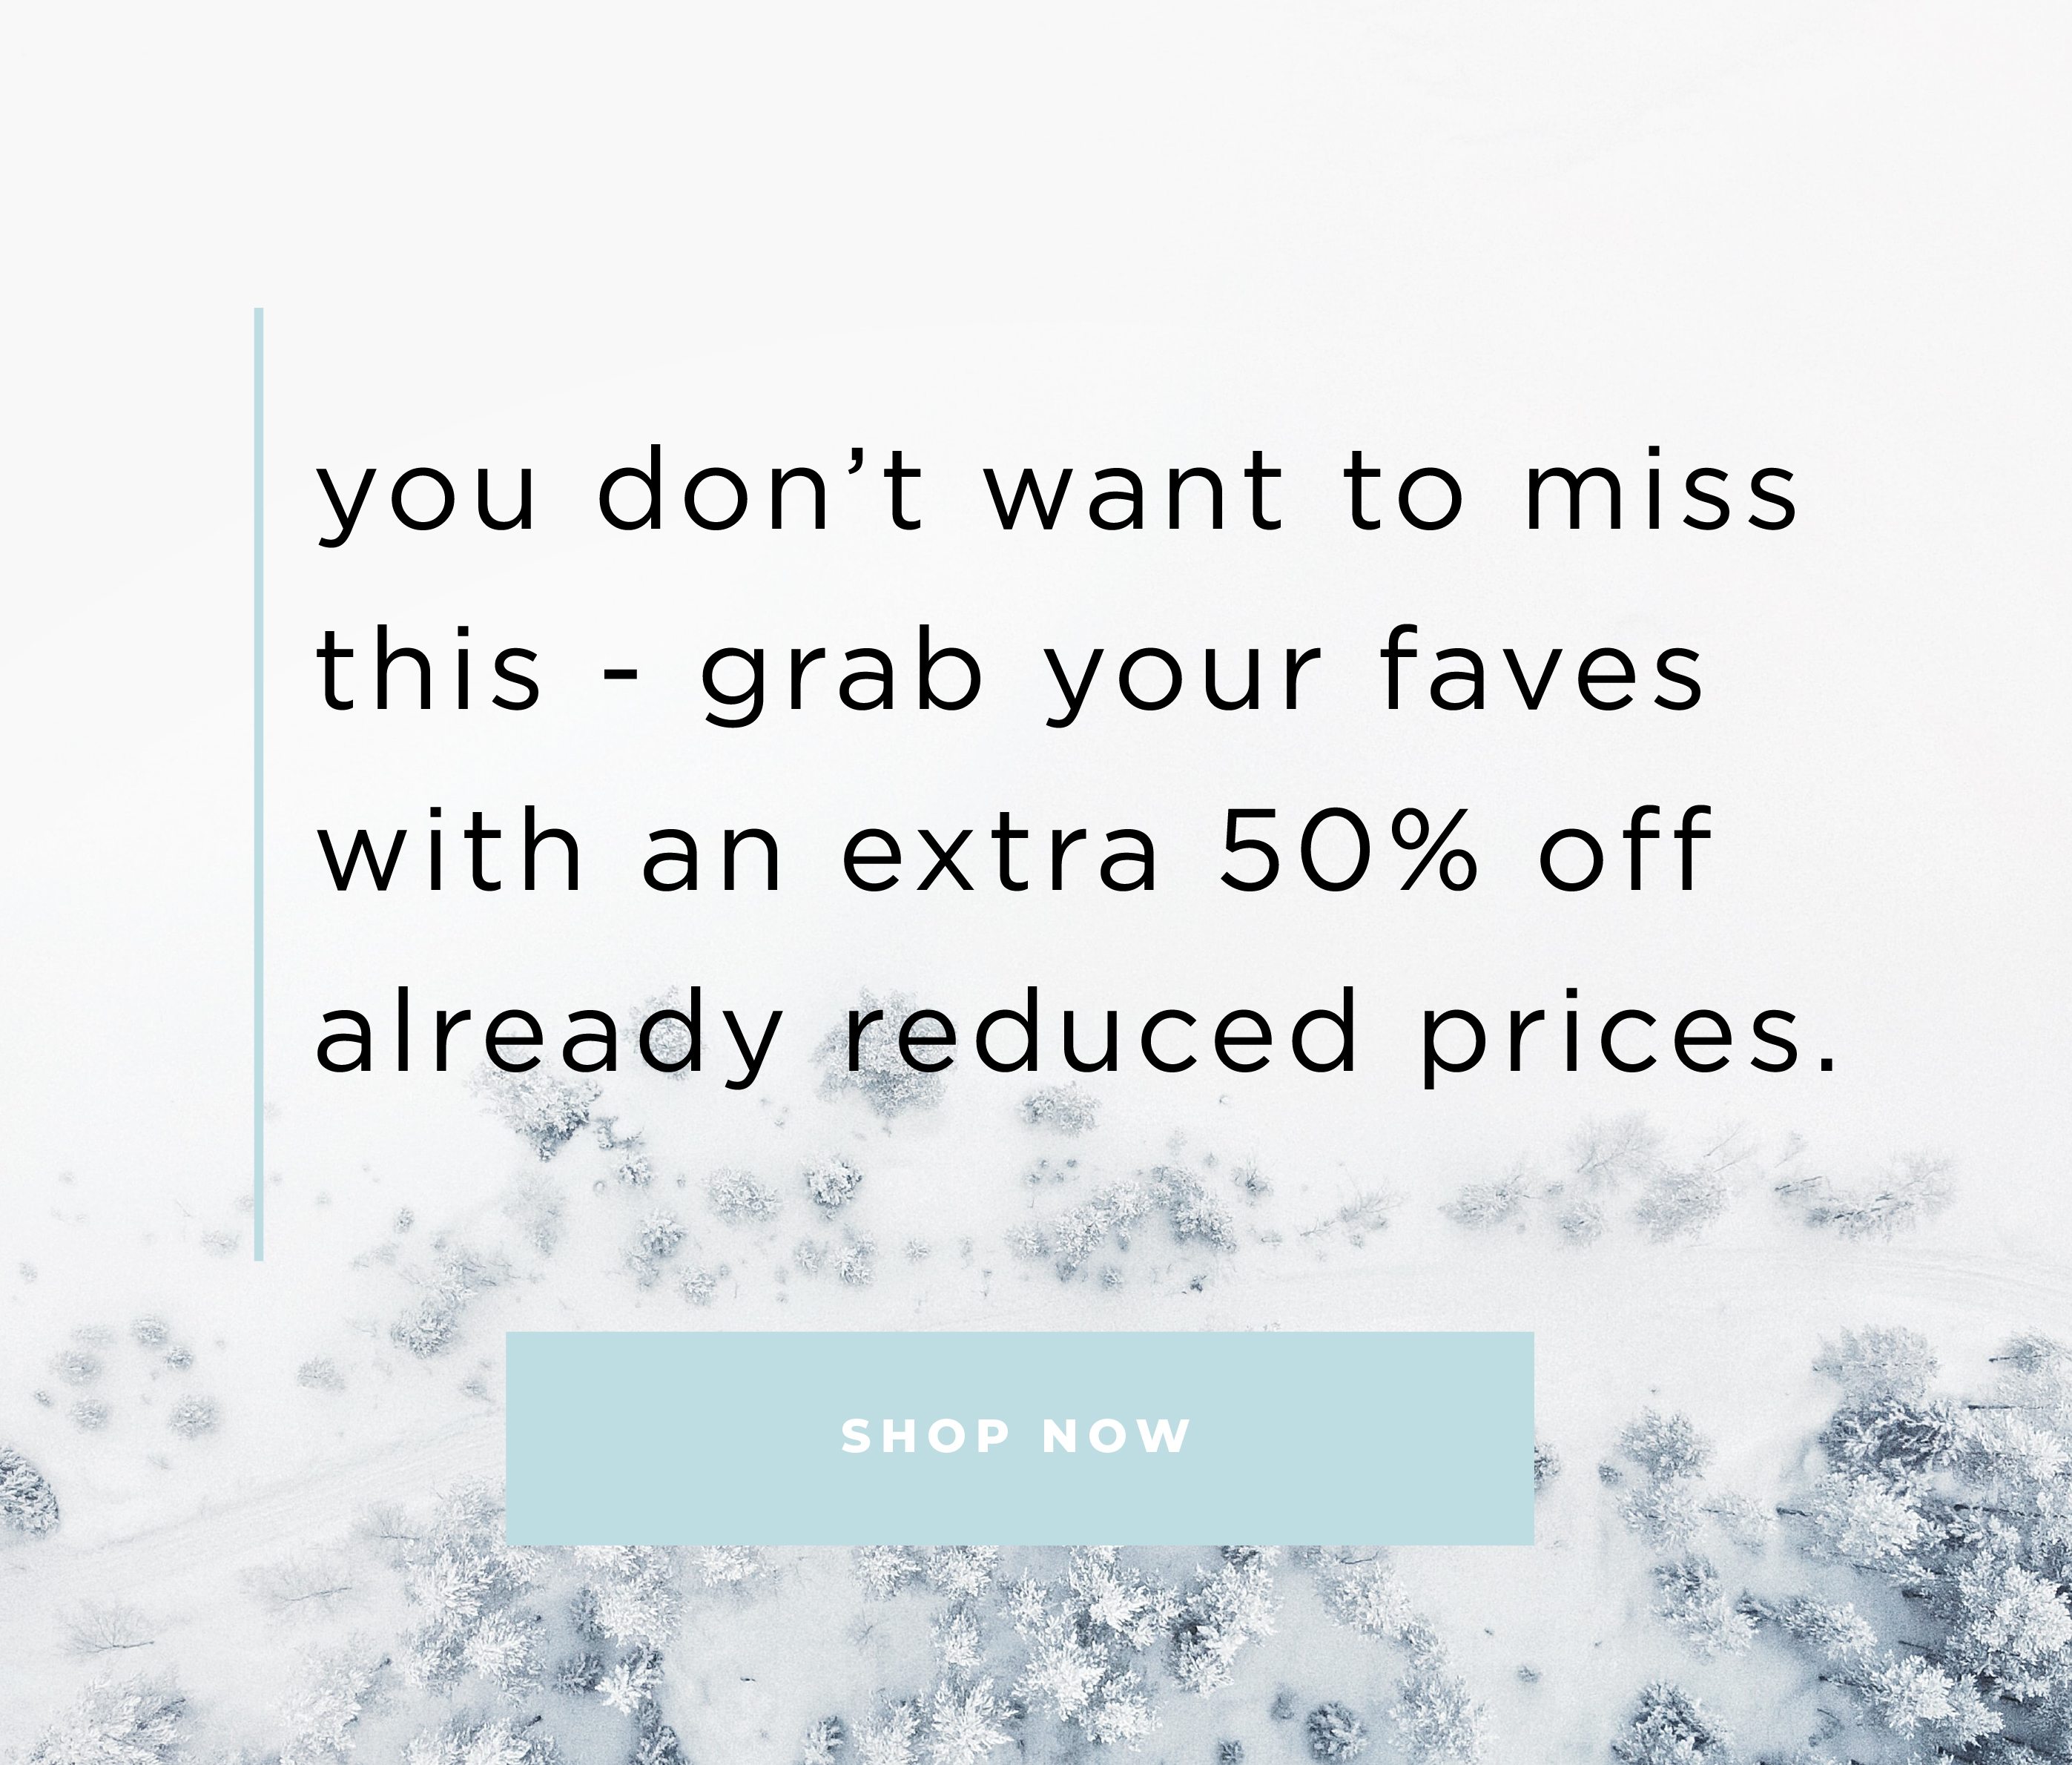 you don't want to miss this - grab your faves with an extra 50% off already reduced prices